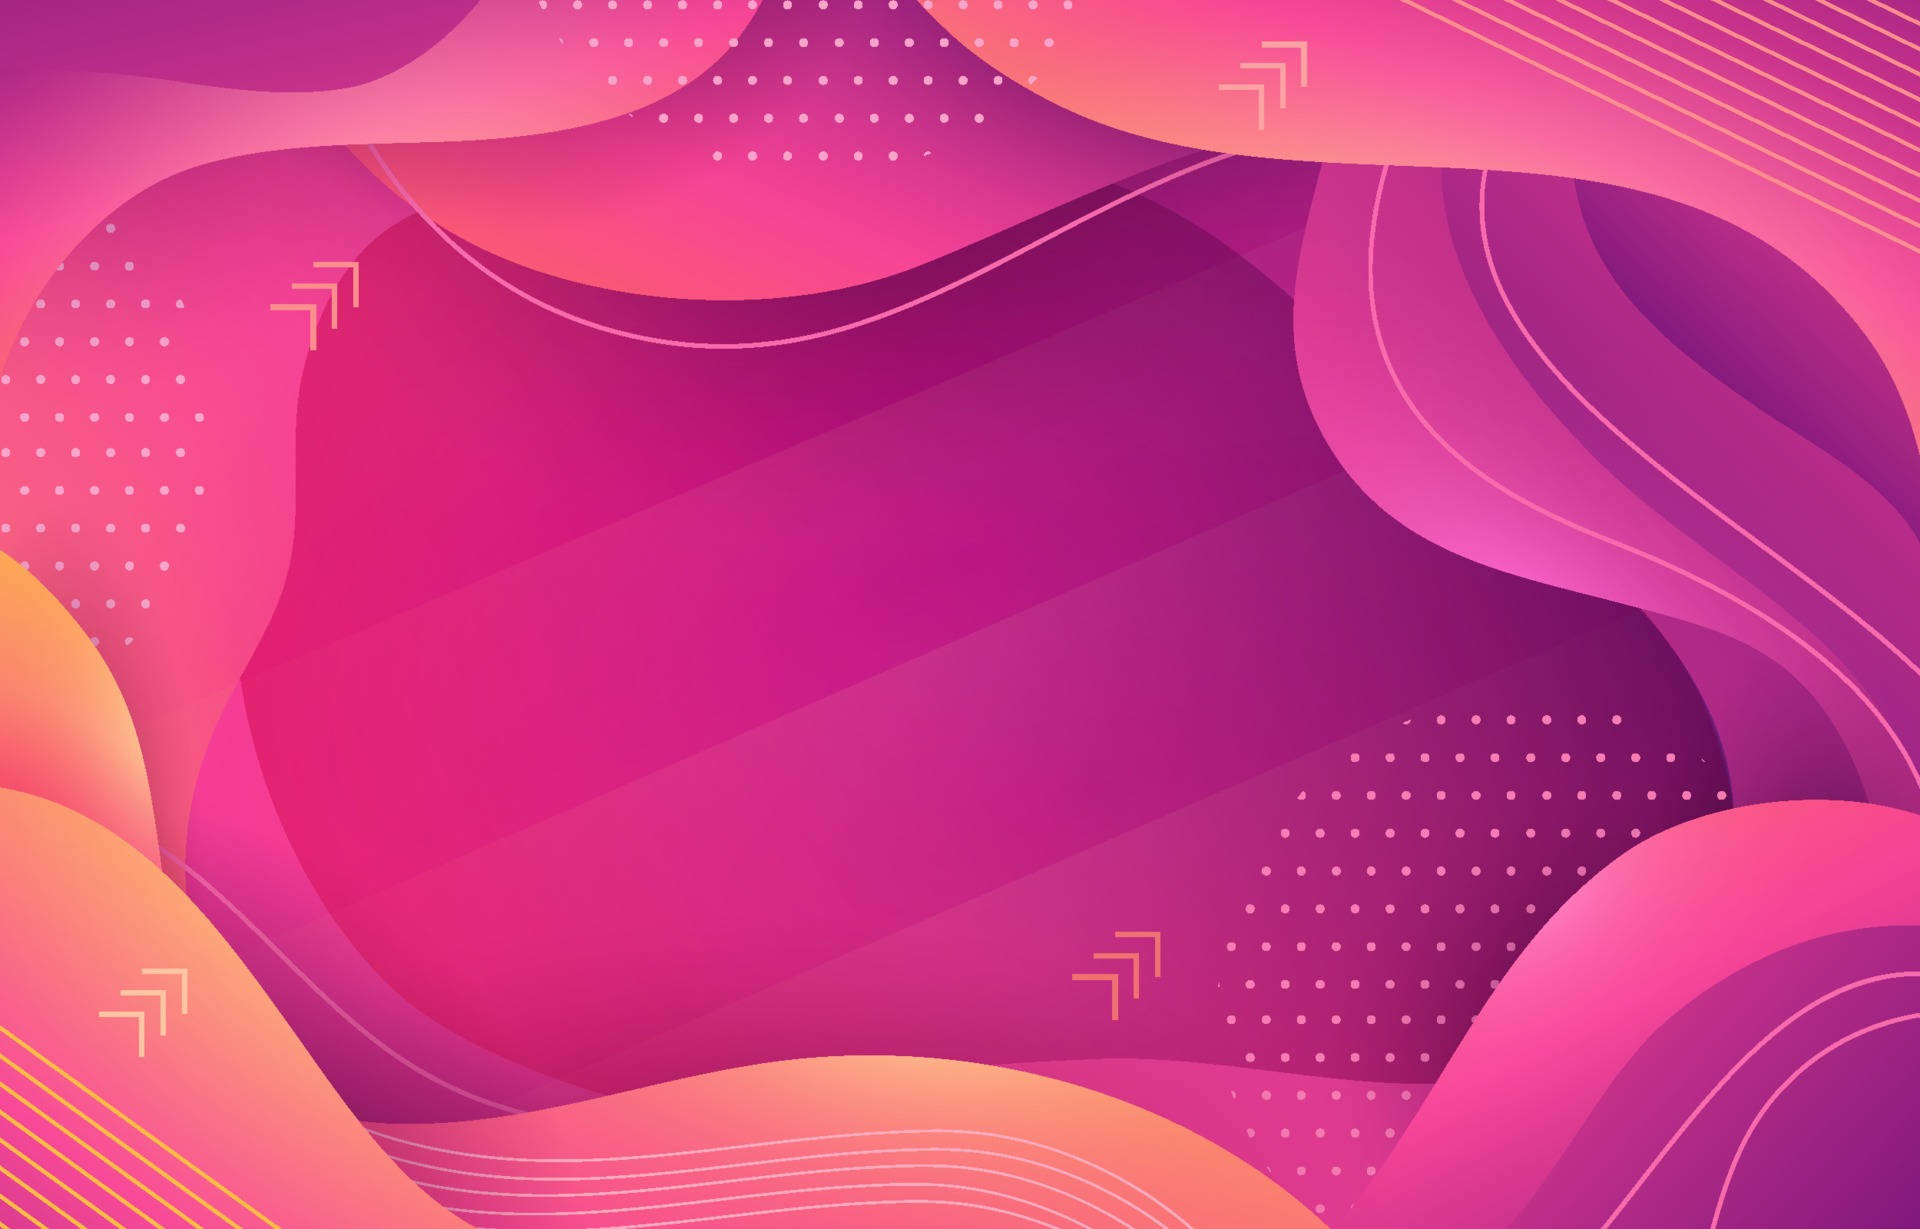 Awesome Magenta Abstract Art Wallpaper